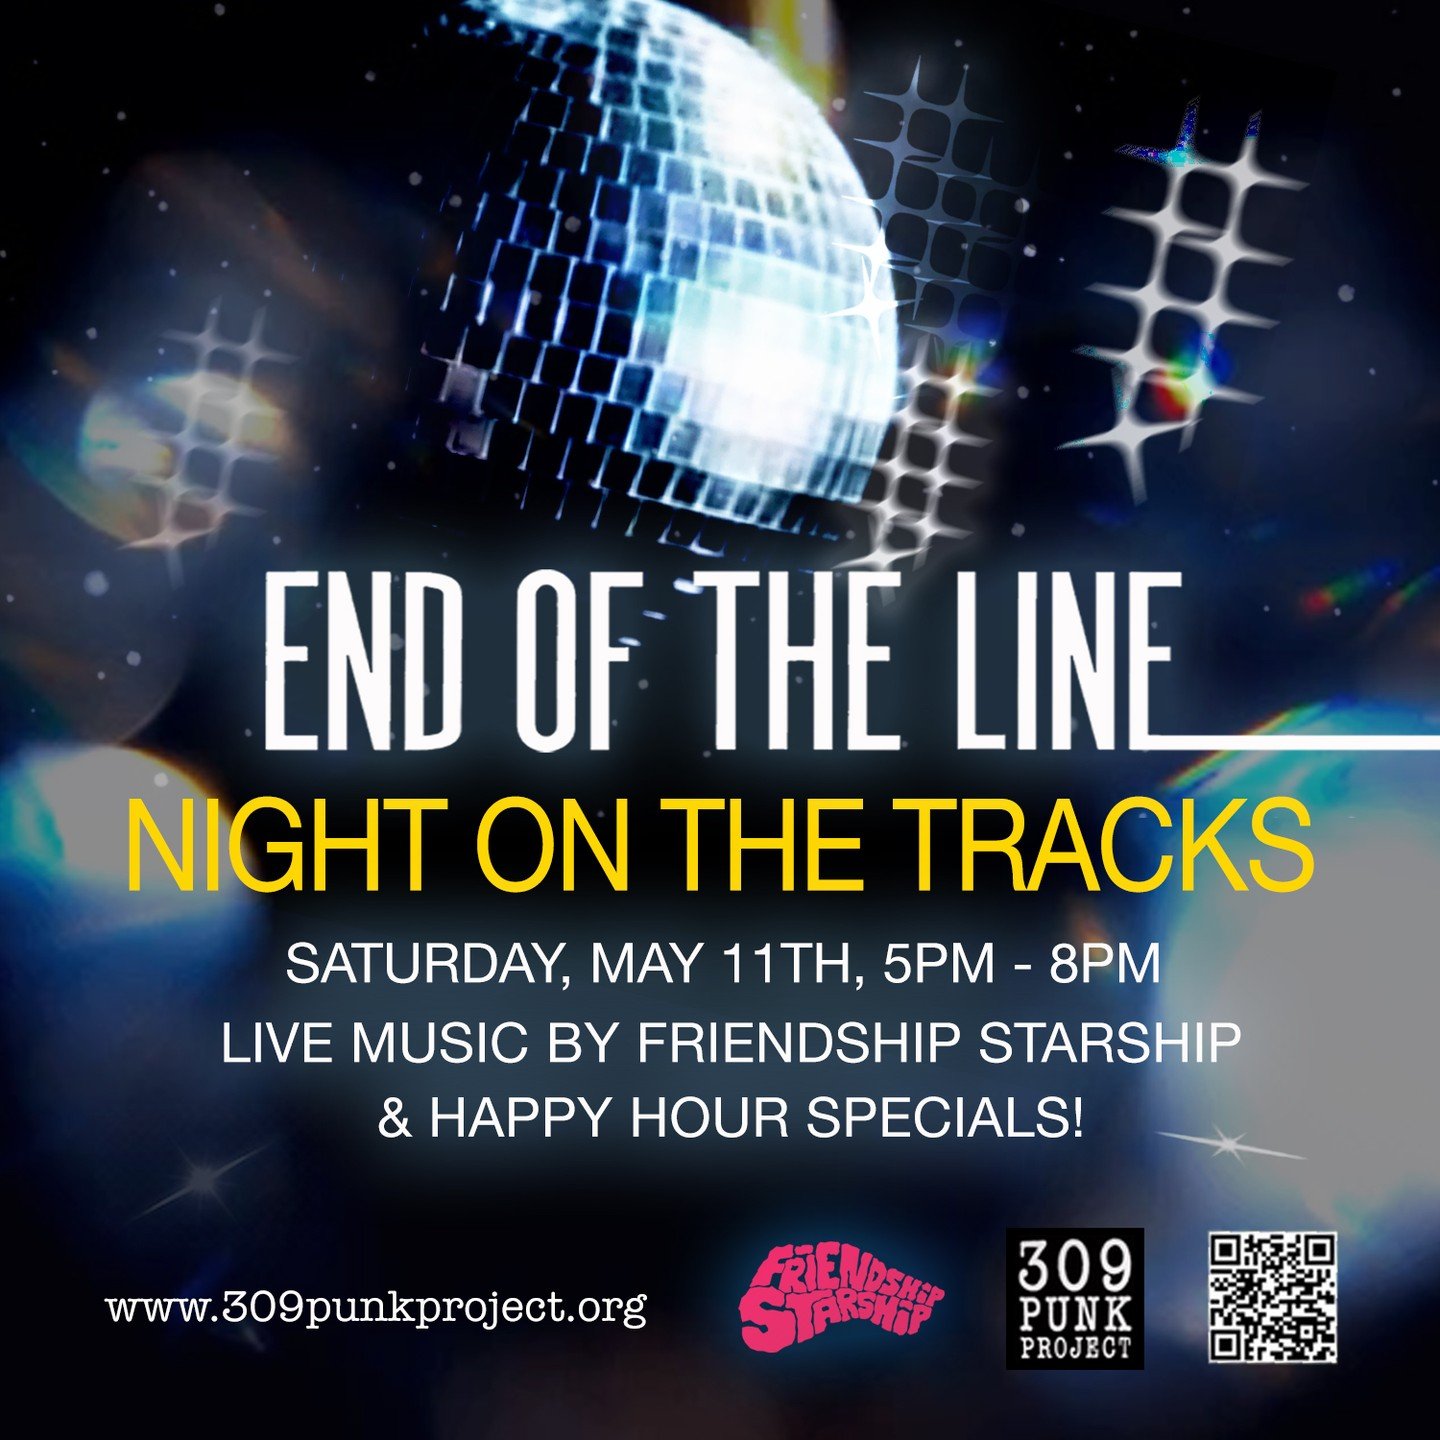 Join End of the Line on Saturday, May 11th, for Night on the Tracks, a multi-venue downtown event hosted by the 309 Punk Project! Enjoy an evening of great food, cold drinks, specials, art exhibitions, and live entertainment by Friendship Starship an